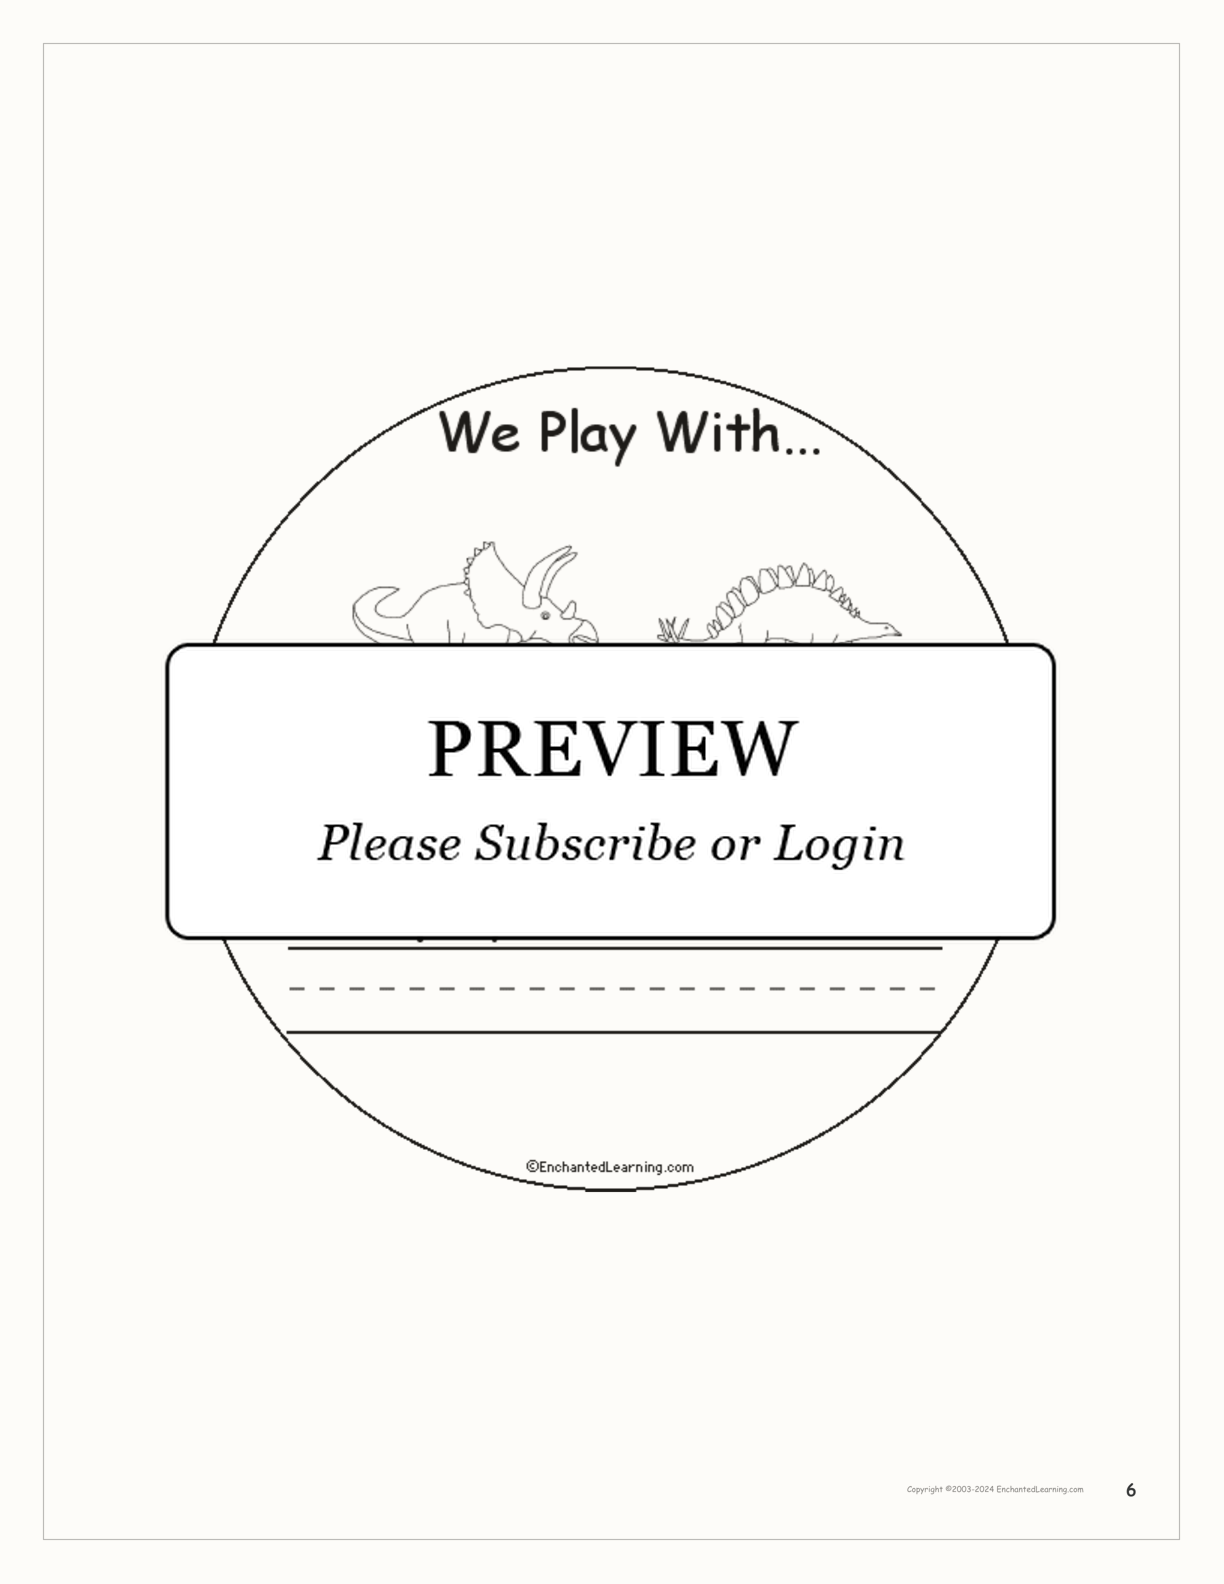 We Play With... Book interactive printout page 6